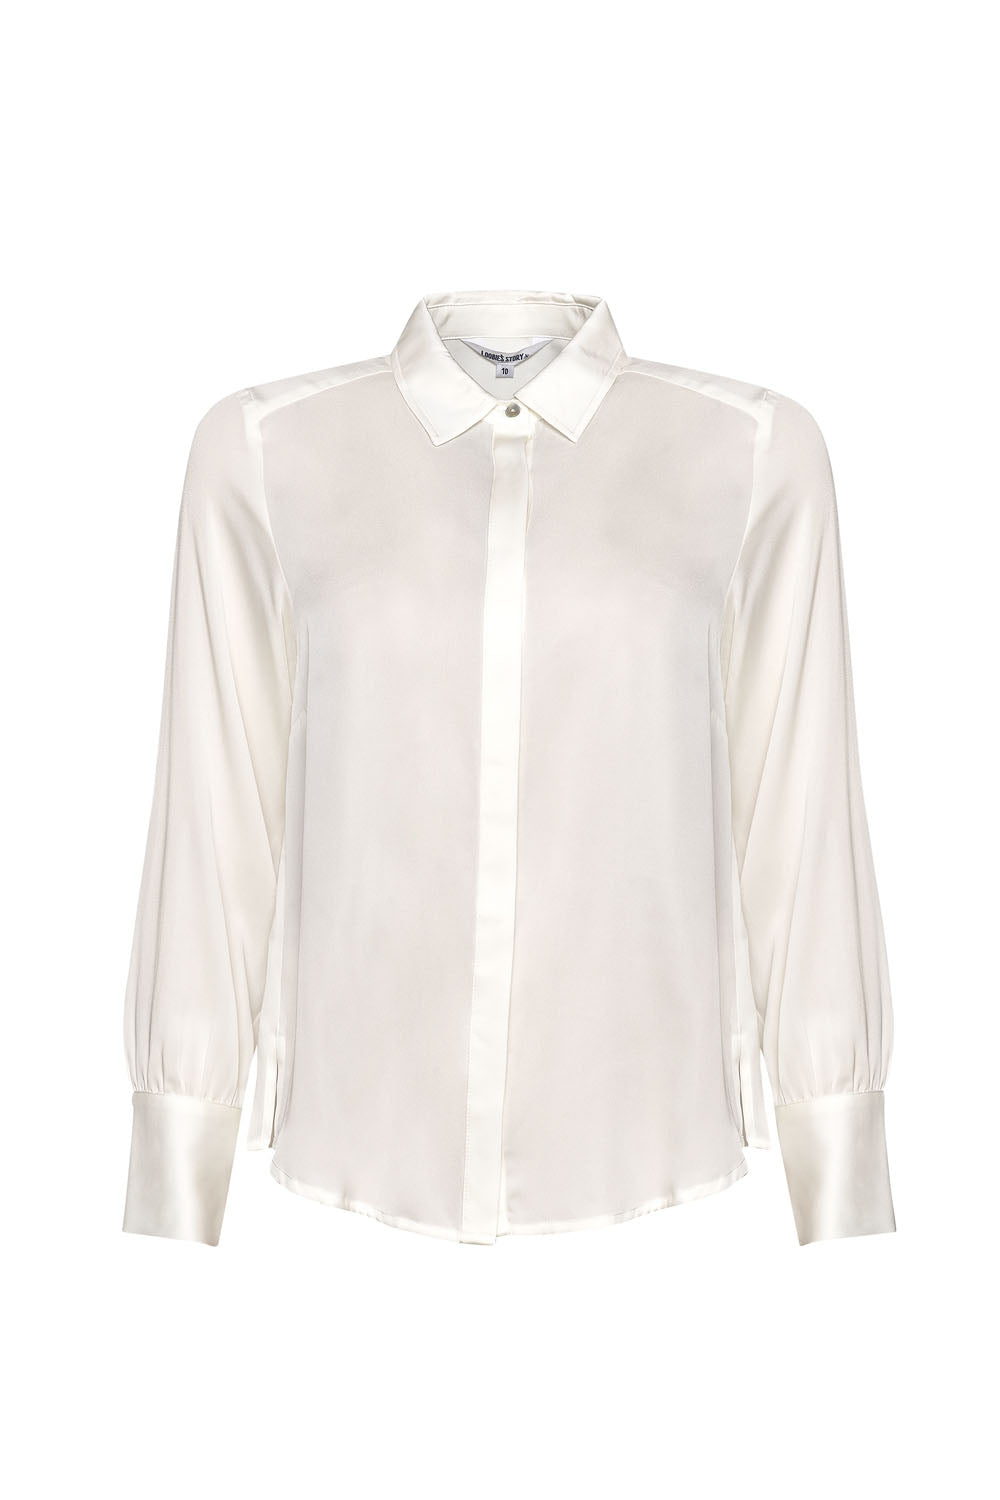 LOOBIES STORY LUXE SHIRT - WHITE